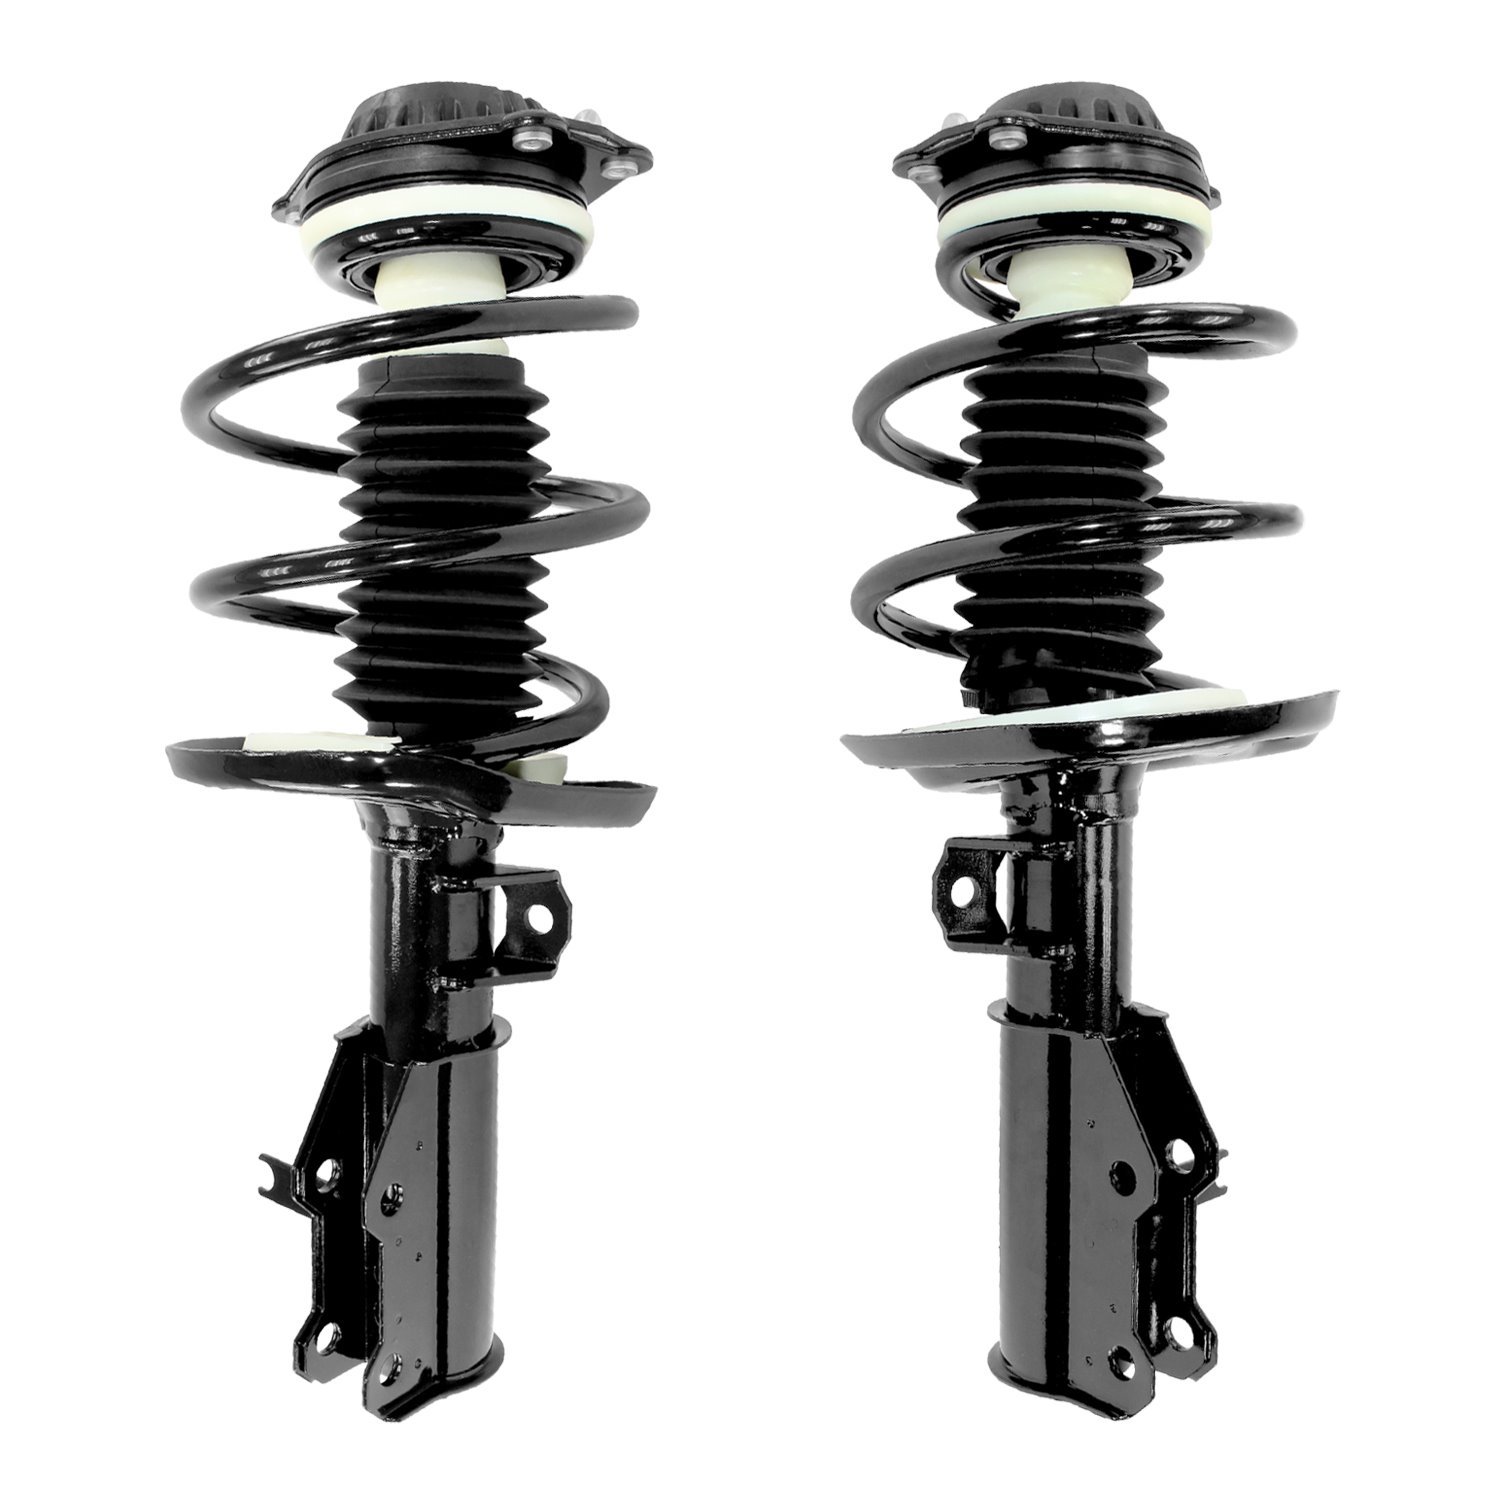 2-13511-13512-001 Front Suspension Strut & Coil Spring Assemby Set Fits Select Chevy Malibu